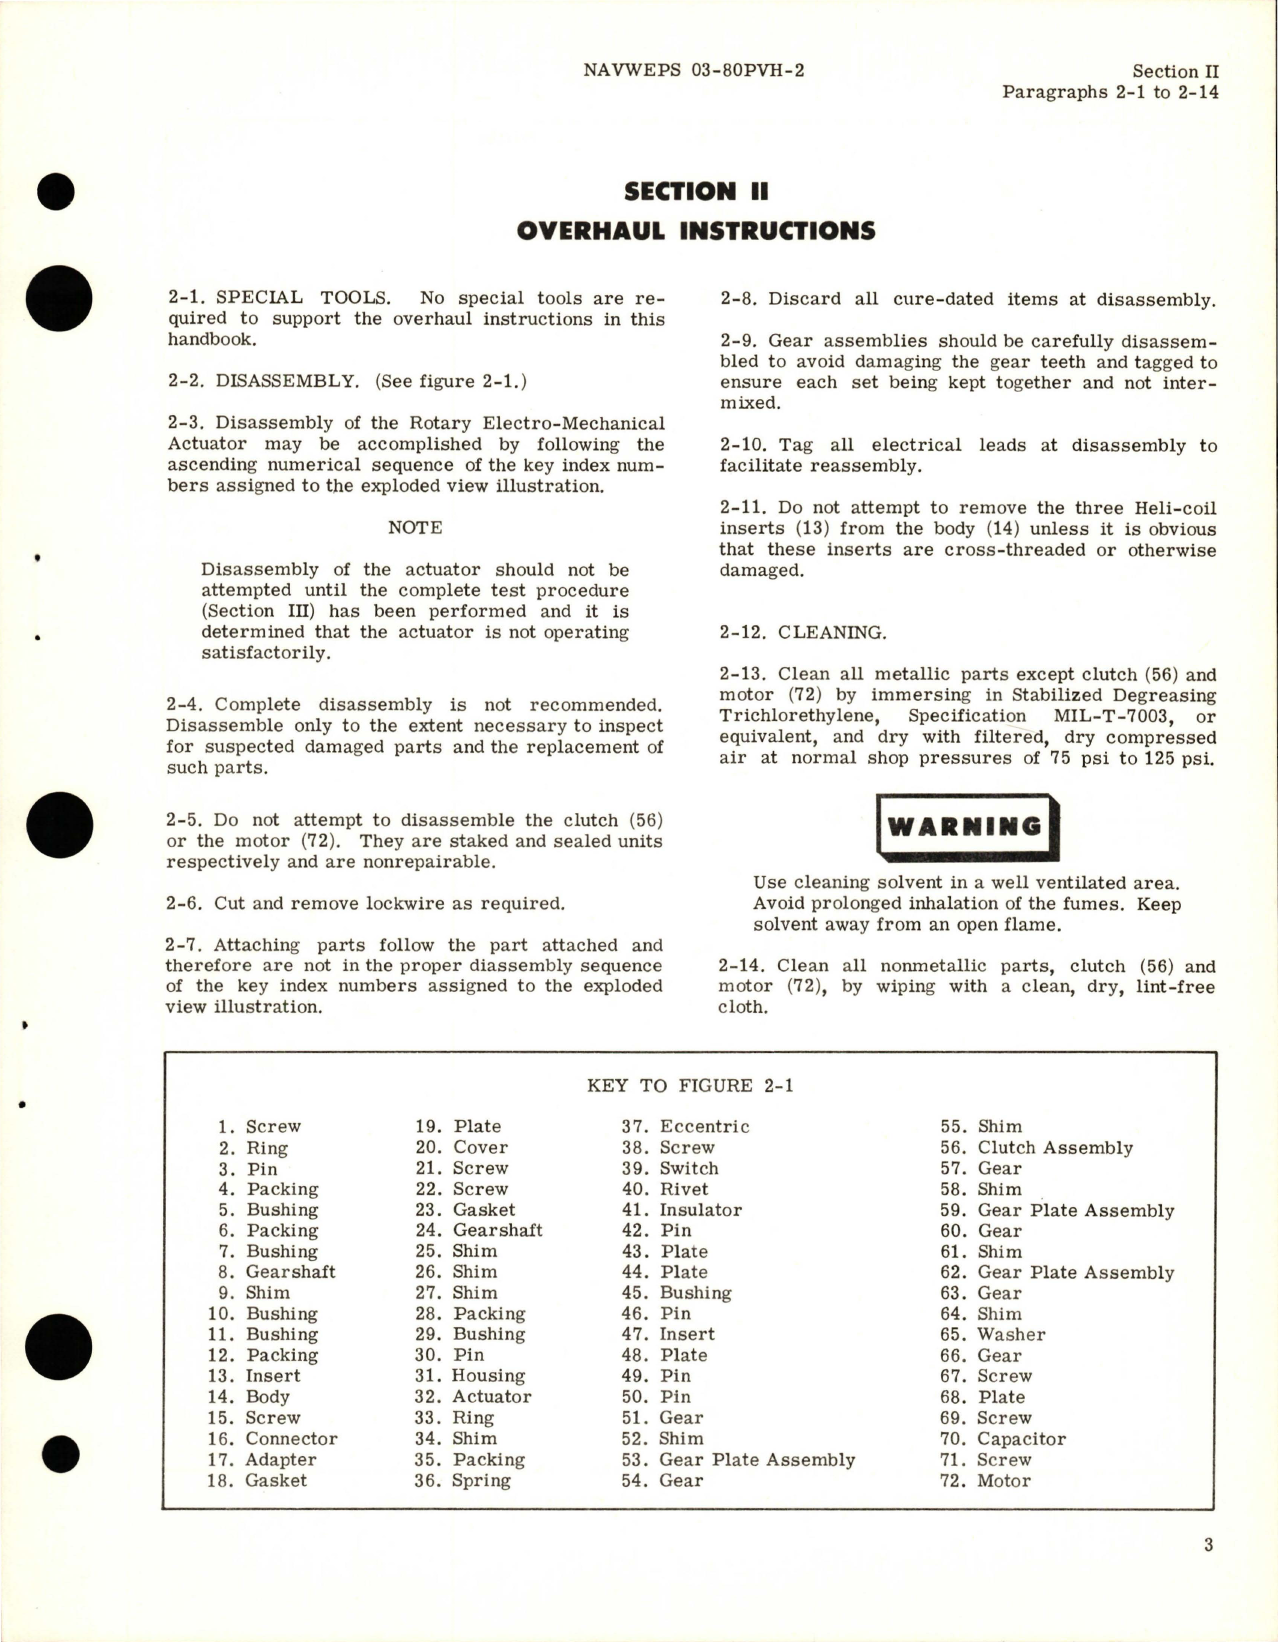 Sample page 7 from AirCorps Library document: Overhaul Instructions for Rotary Electro-Mechanical Actuator - Parts 25730030-02, 25730030-20, 25730060-01, and 25730060-20 